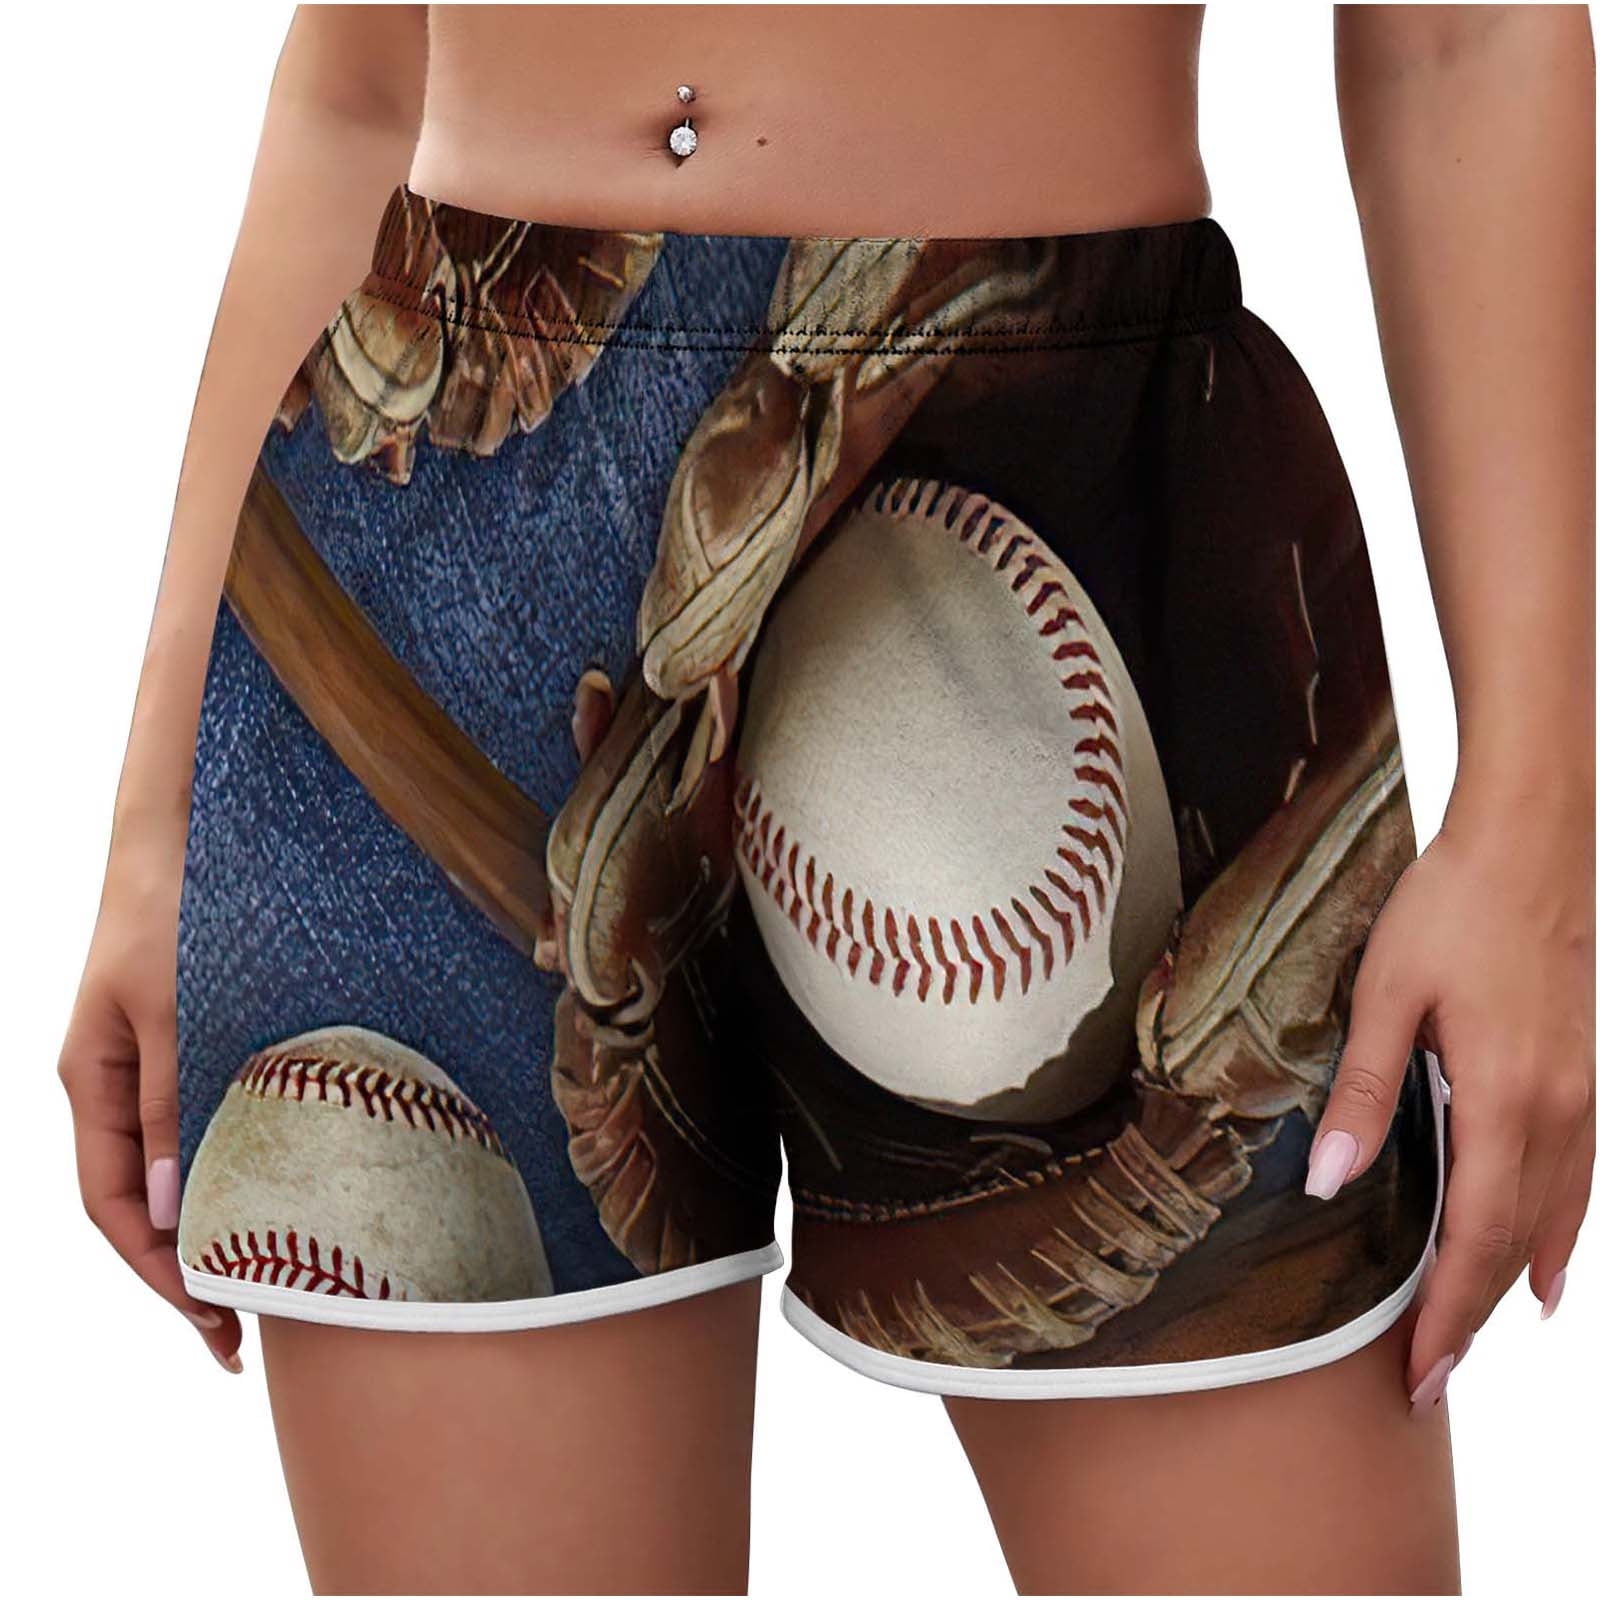 Shorts for Women, Women'S Lightweight Summer Casual Elastic Waist Baseball  Print Shorts Baggy Comfy Beach Shorts Outlet Deals Overstock Clearance  Unclaimed Packages #3 